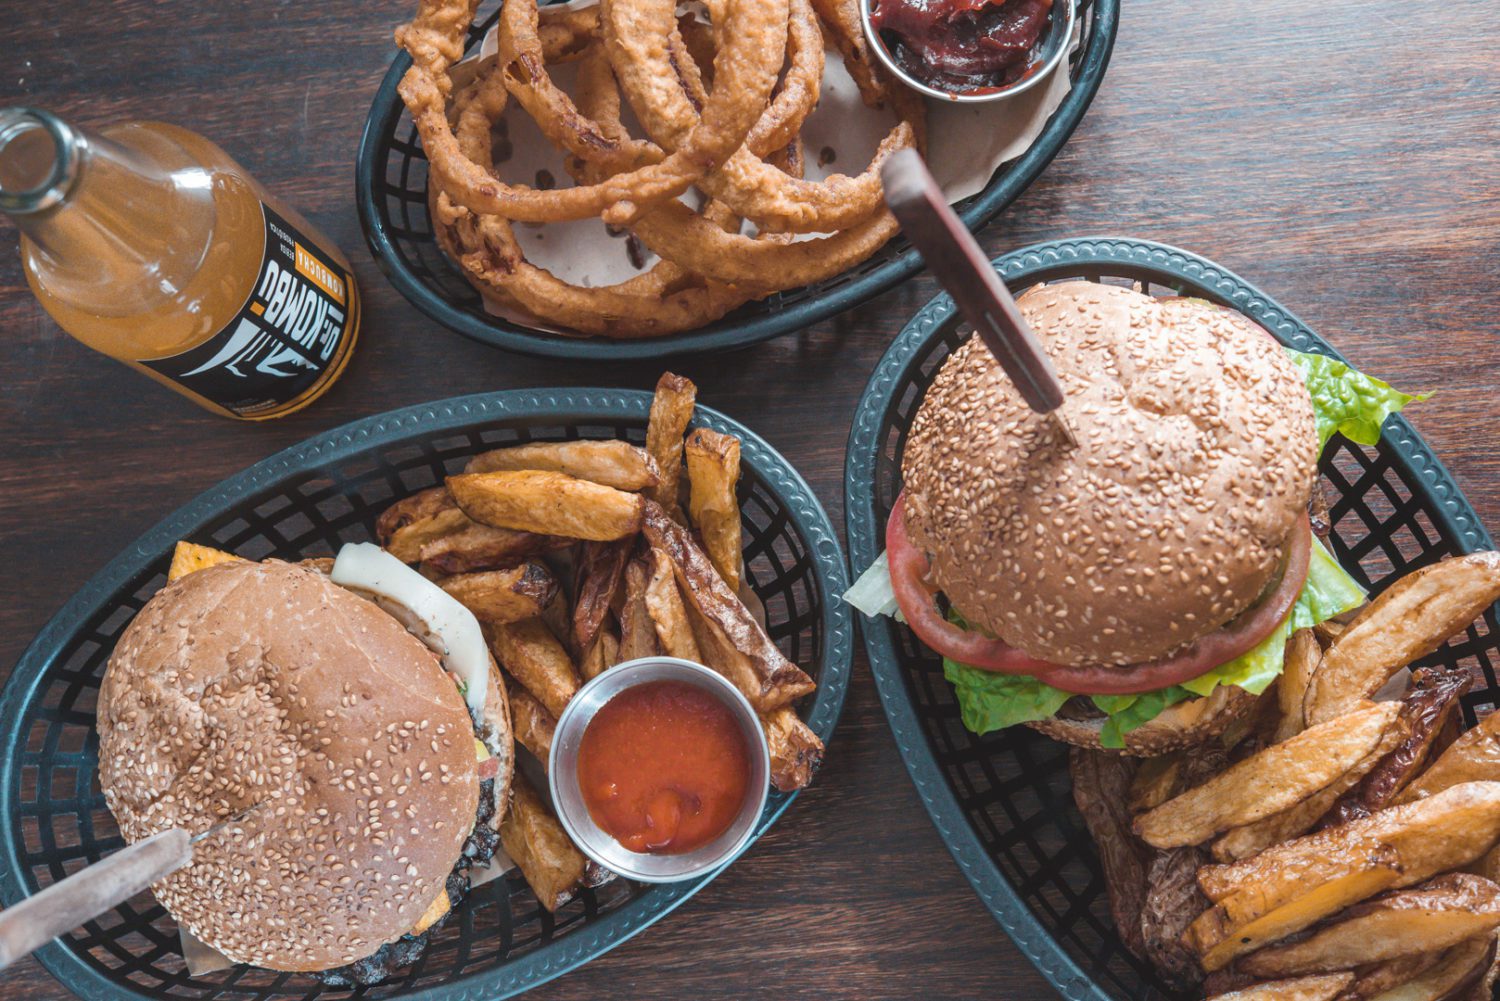 Plant-based vegan burgers and onion rings